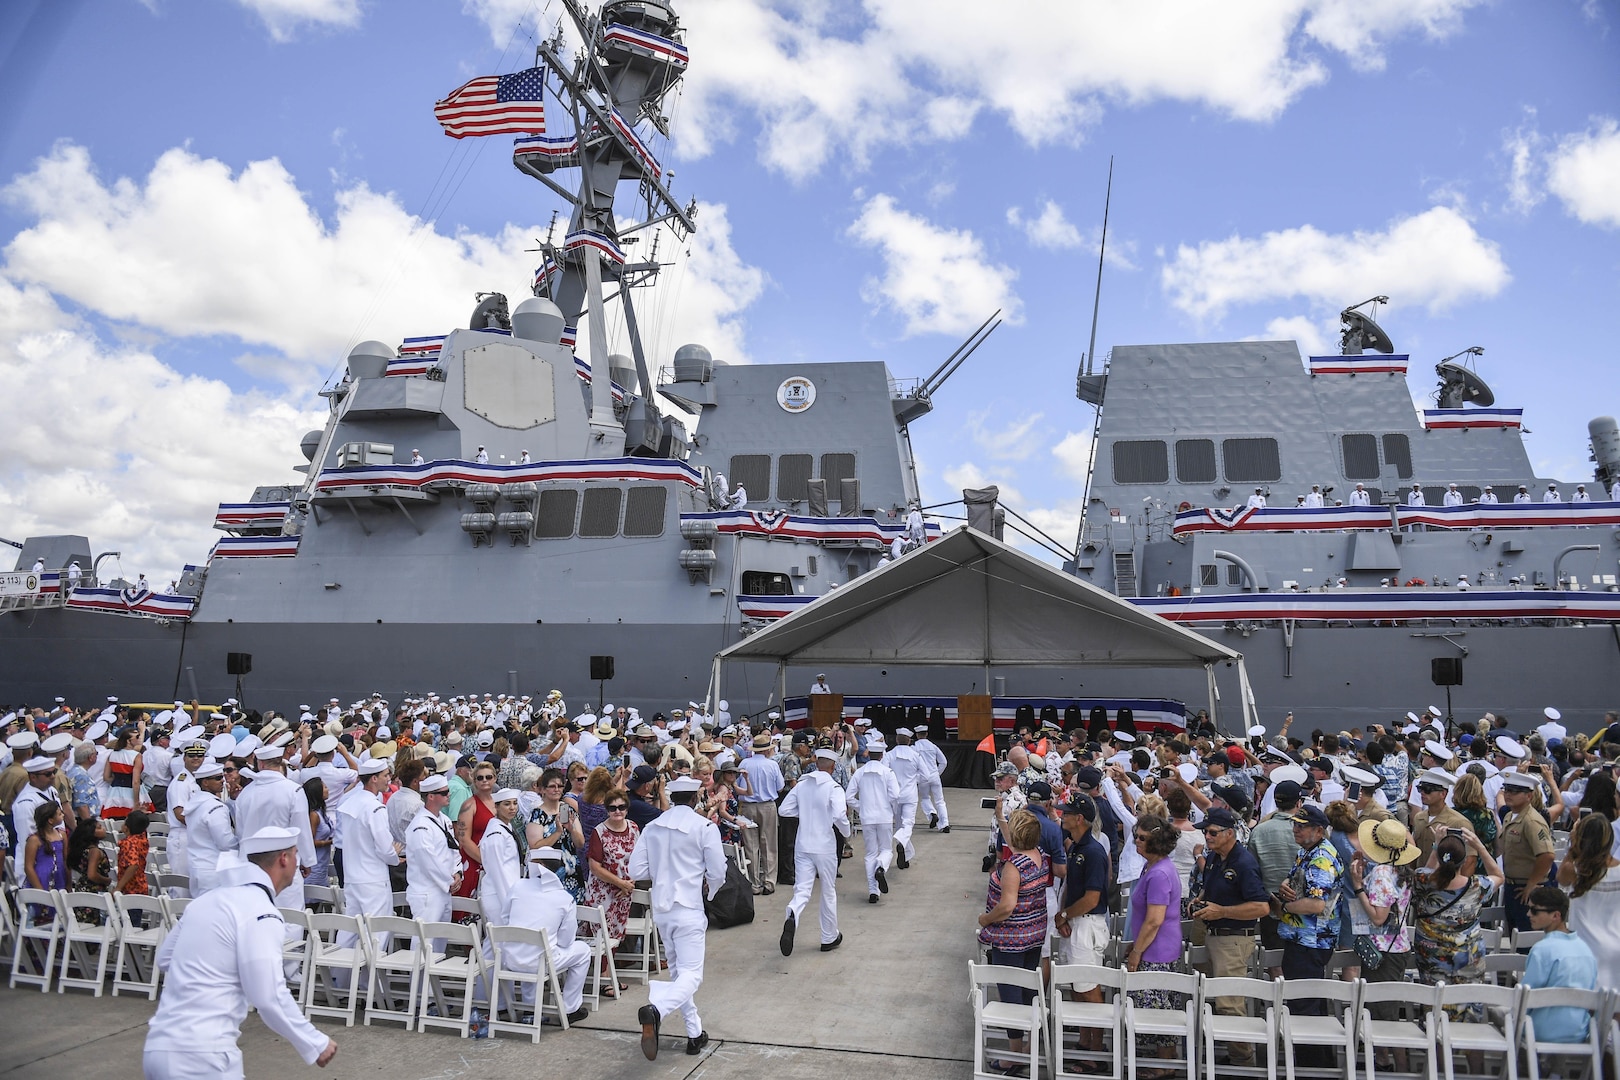 170715-N-WM477-0173 -- PEARL HARBOR (July 15, 2017) The crew of the Navy's newest Arleigh Burke-class guided-missile destroyer, USS John Finn (DDG 113) brings the ship to life during its commissioning ceremony. DDG 113 is named in honor of Lt. John William Finn, who as a chief aviation ordnanceman was the first member of our armed services to earn the Medal of Honor during World War II for heroism during the attack on Pearl Harbor. (U.S. Navy Photo by Mass Communication Specialist Aiyana Paschal)